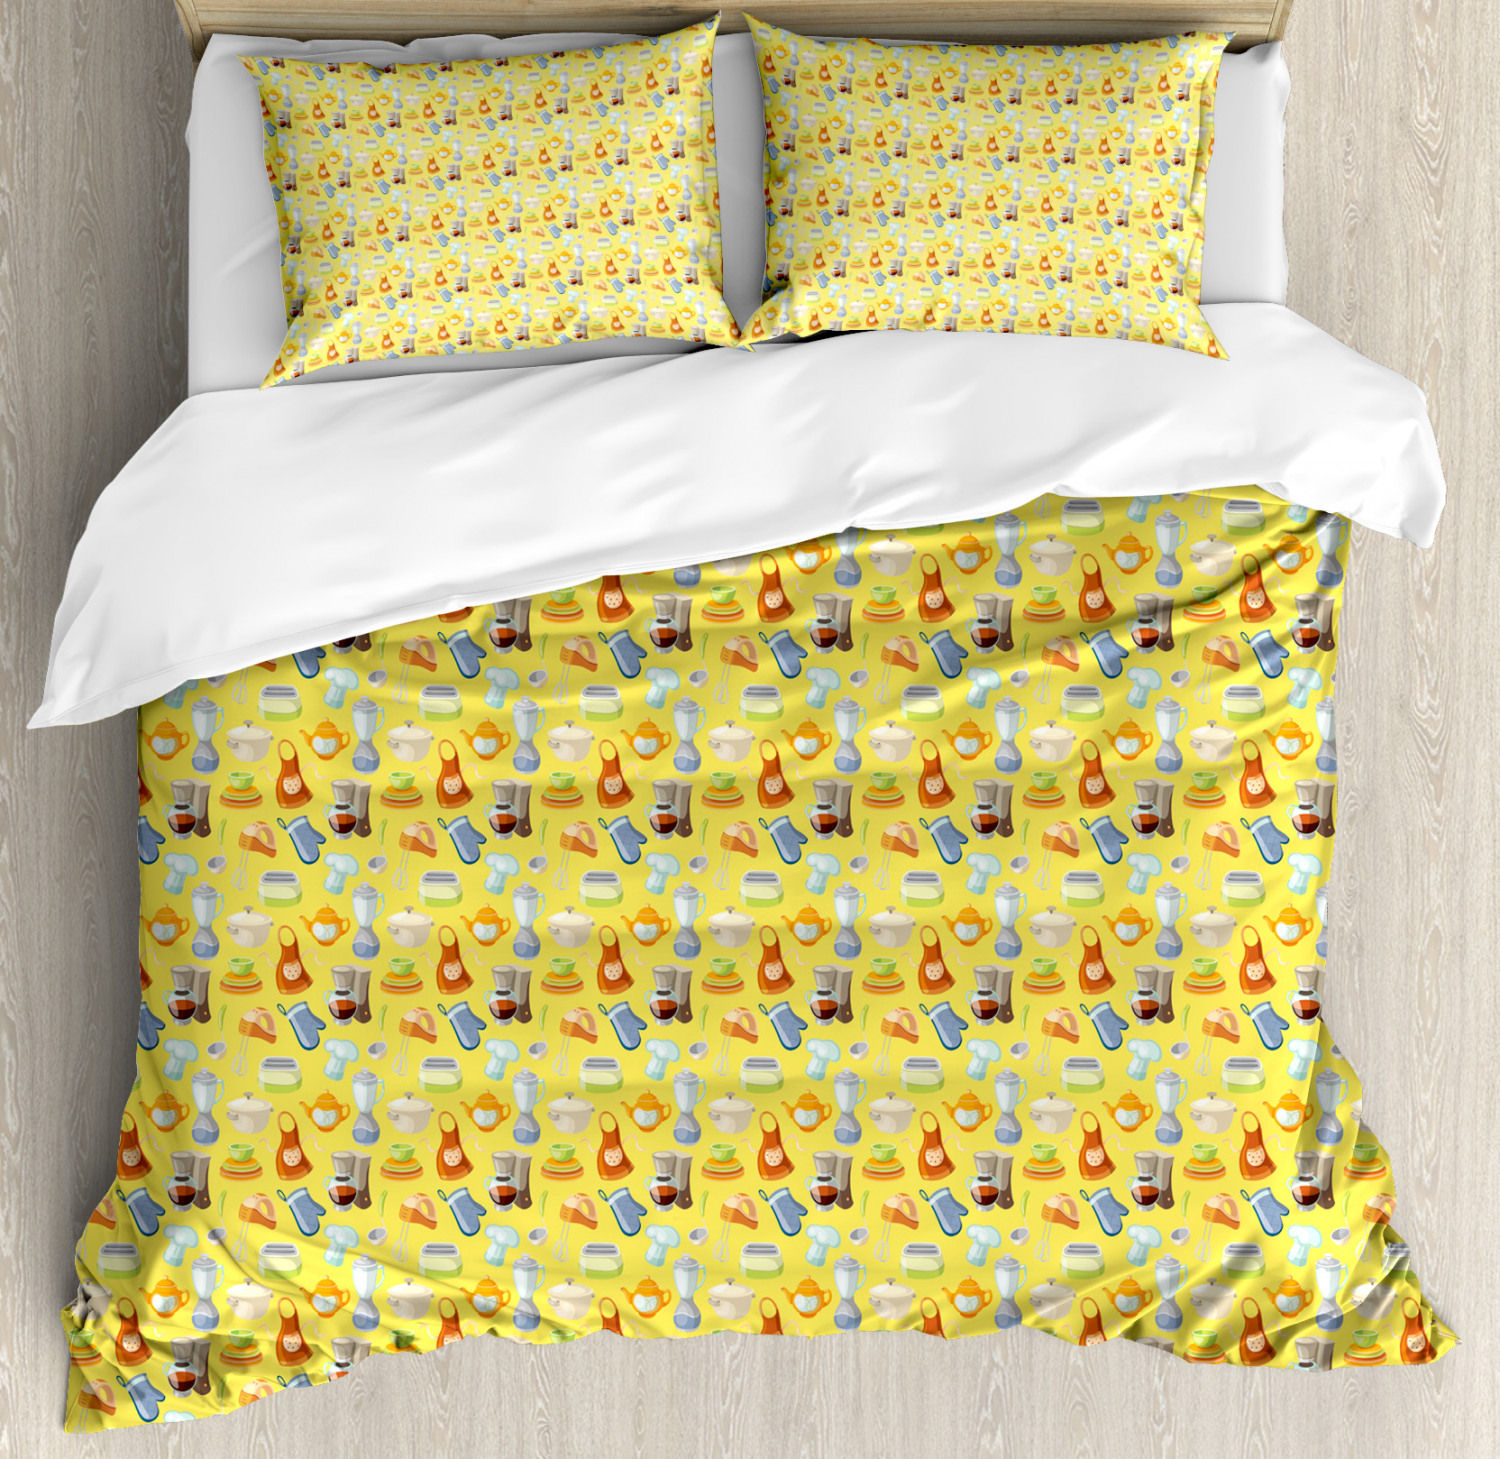 Colorful Duvet Cover Set Twin Queen King Sizes with Pillow S